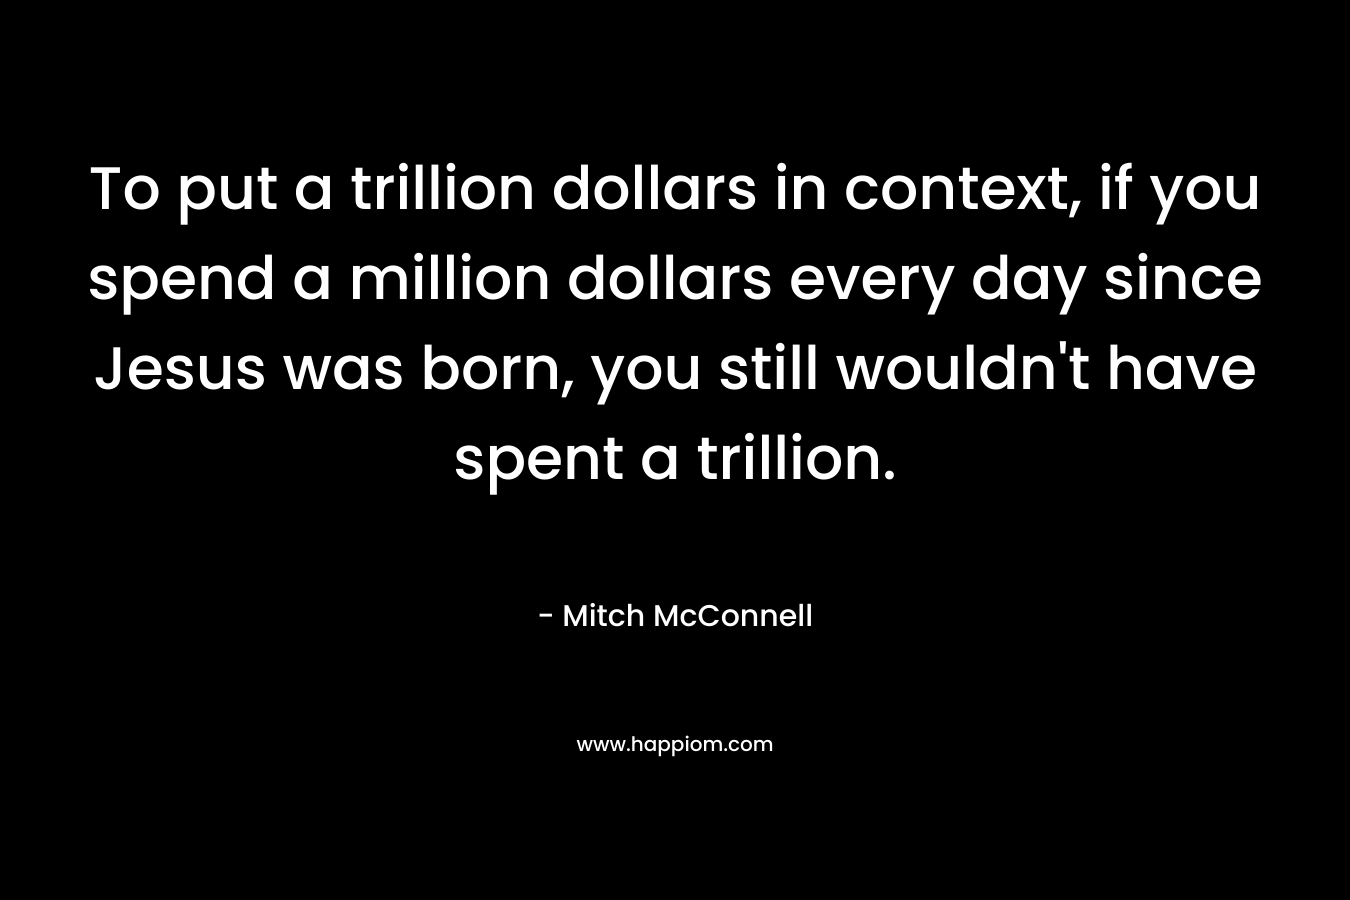 To put a trillion dollars in context, if you spend a million dollars every day since Jesus was born, you still wouldn’t have spent a trillion. – Mitch McConnell